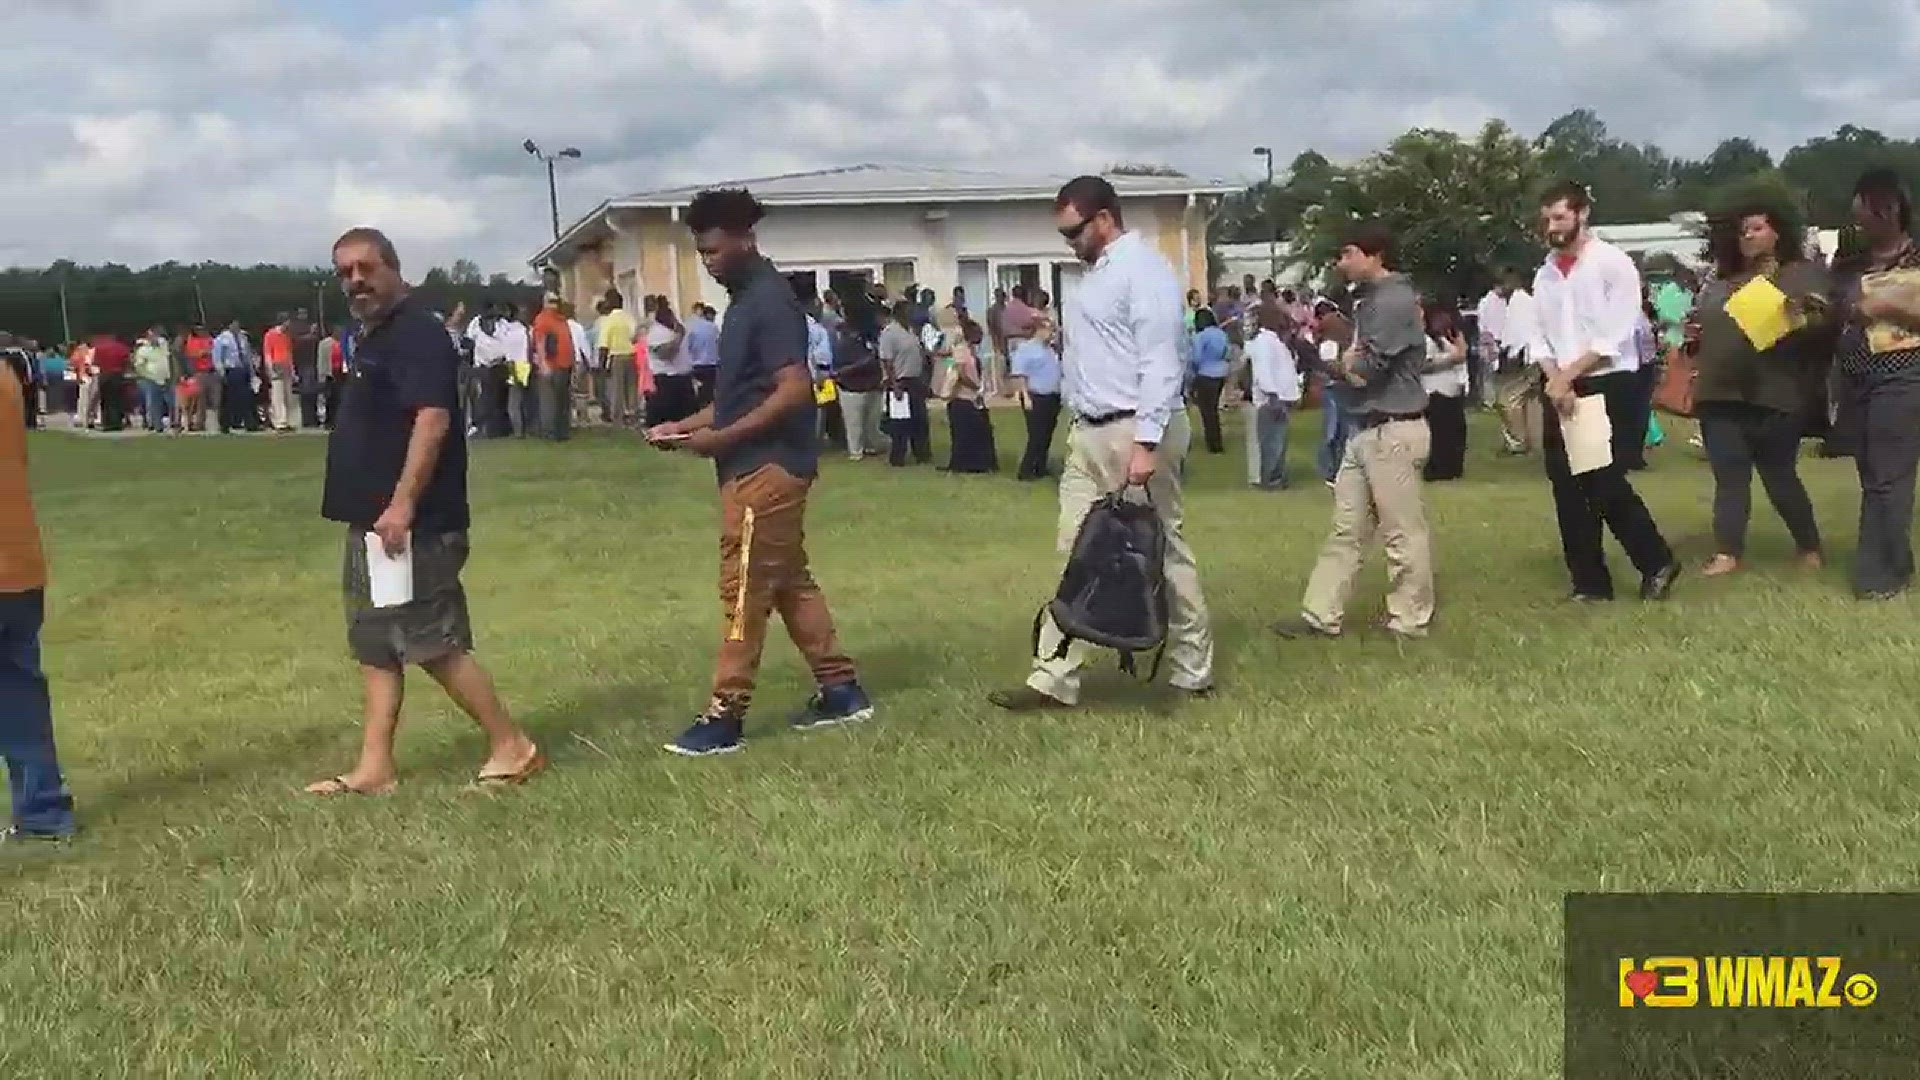 Thousand of people braved the heat Thursday packing the campus of Central Georgia Technical College in Warner Robins for the Robins AFB job fair. The base said they're looking to hire around 400 workers.